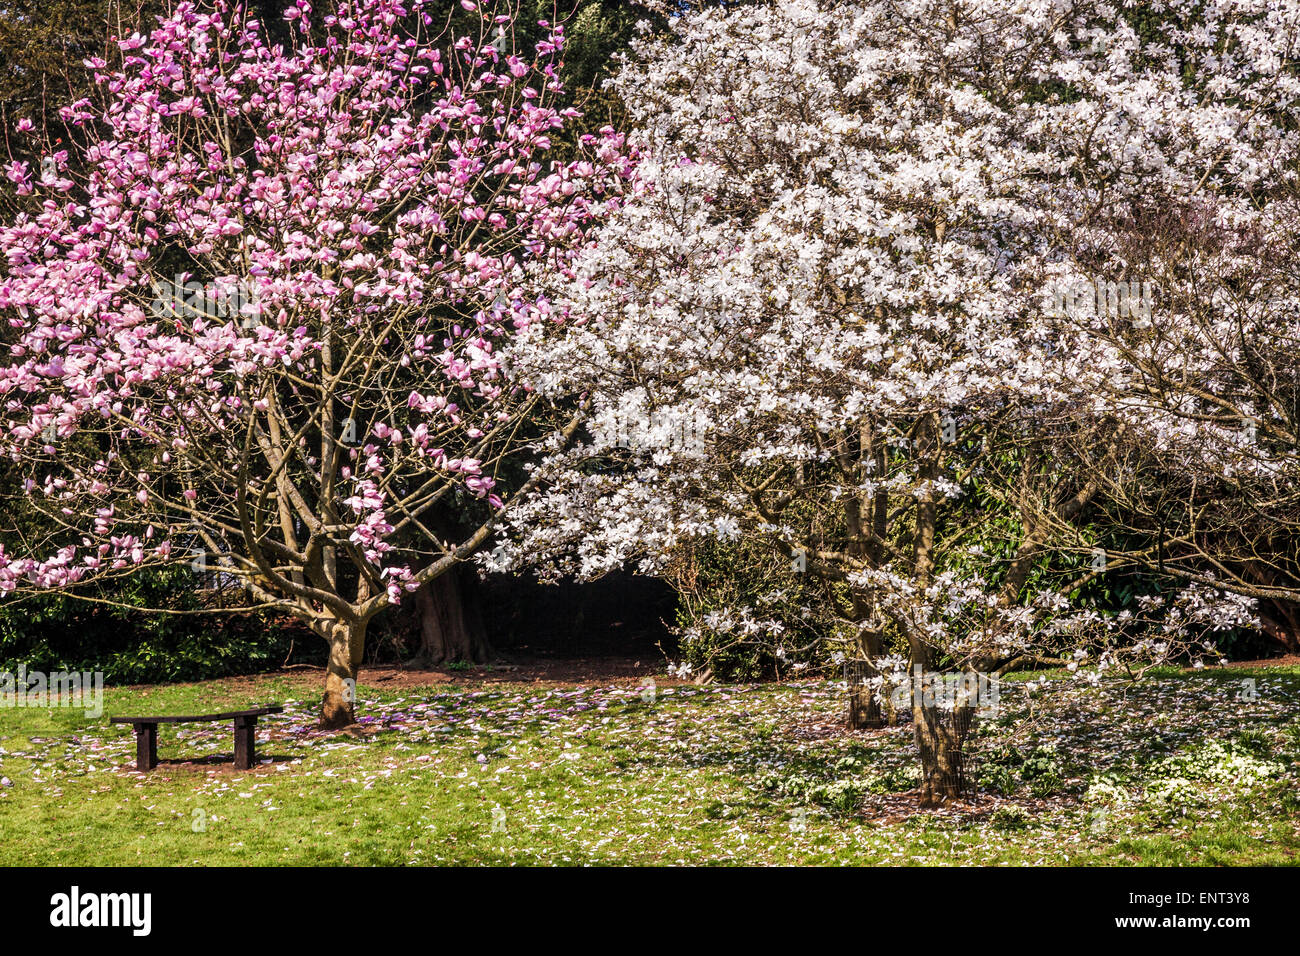 Magnolia trees at Bowood House in Wiltshire. Stock Photo